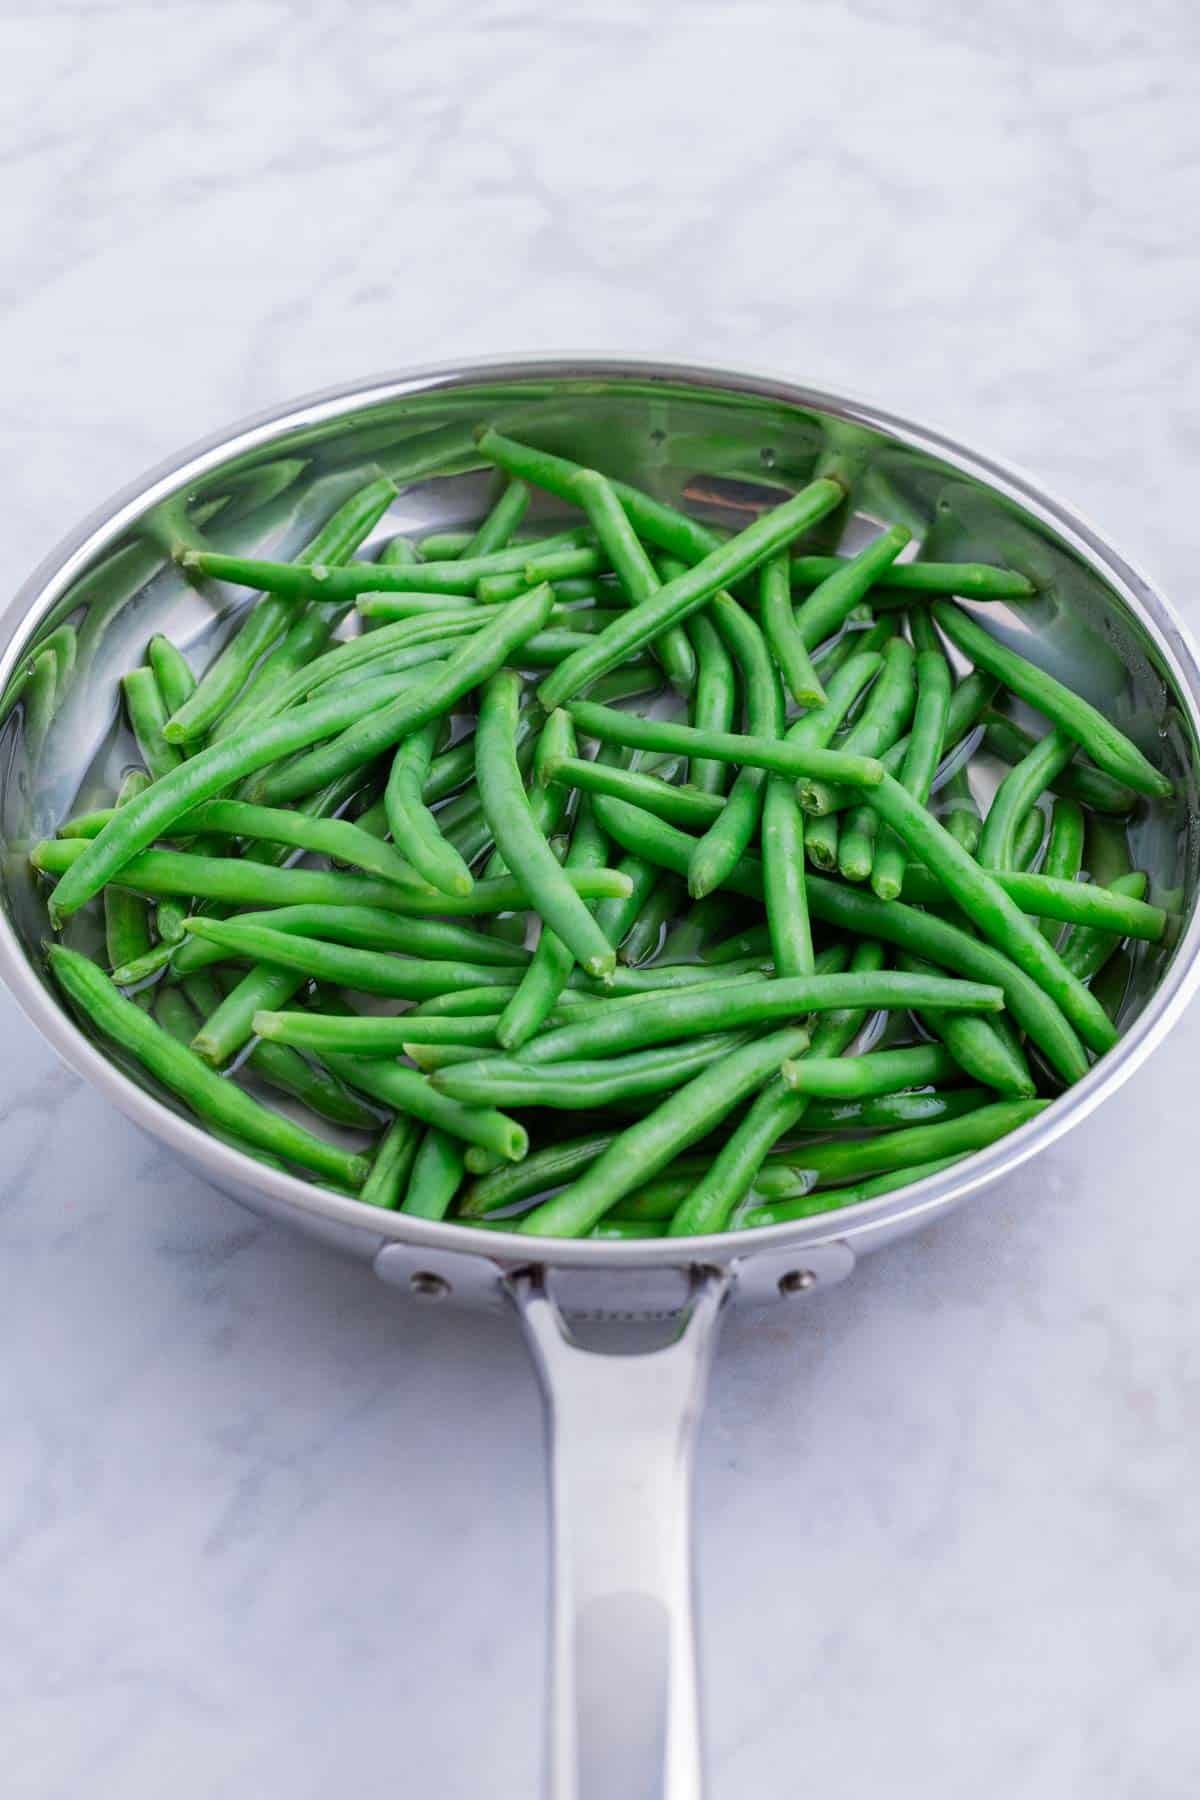 Green beans are quickly boiled in a skillet.